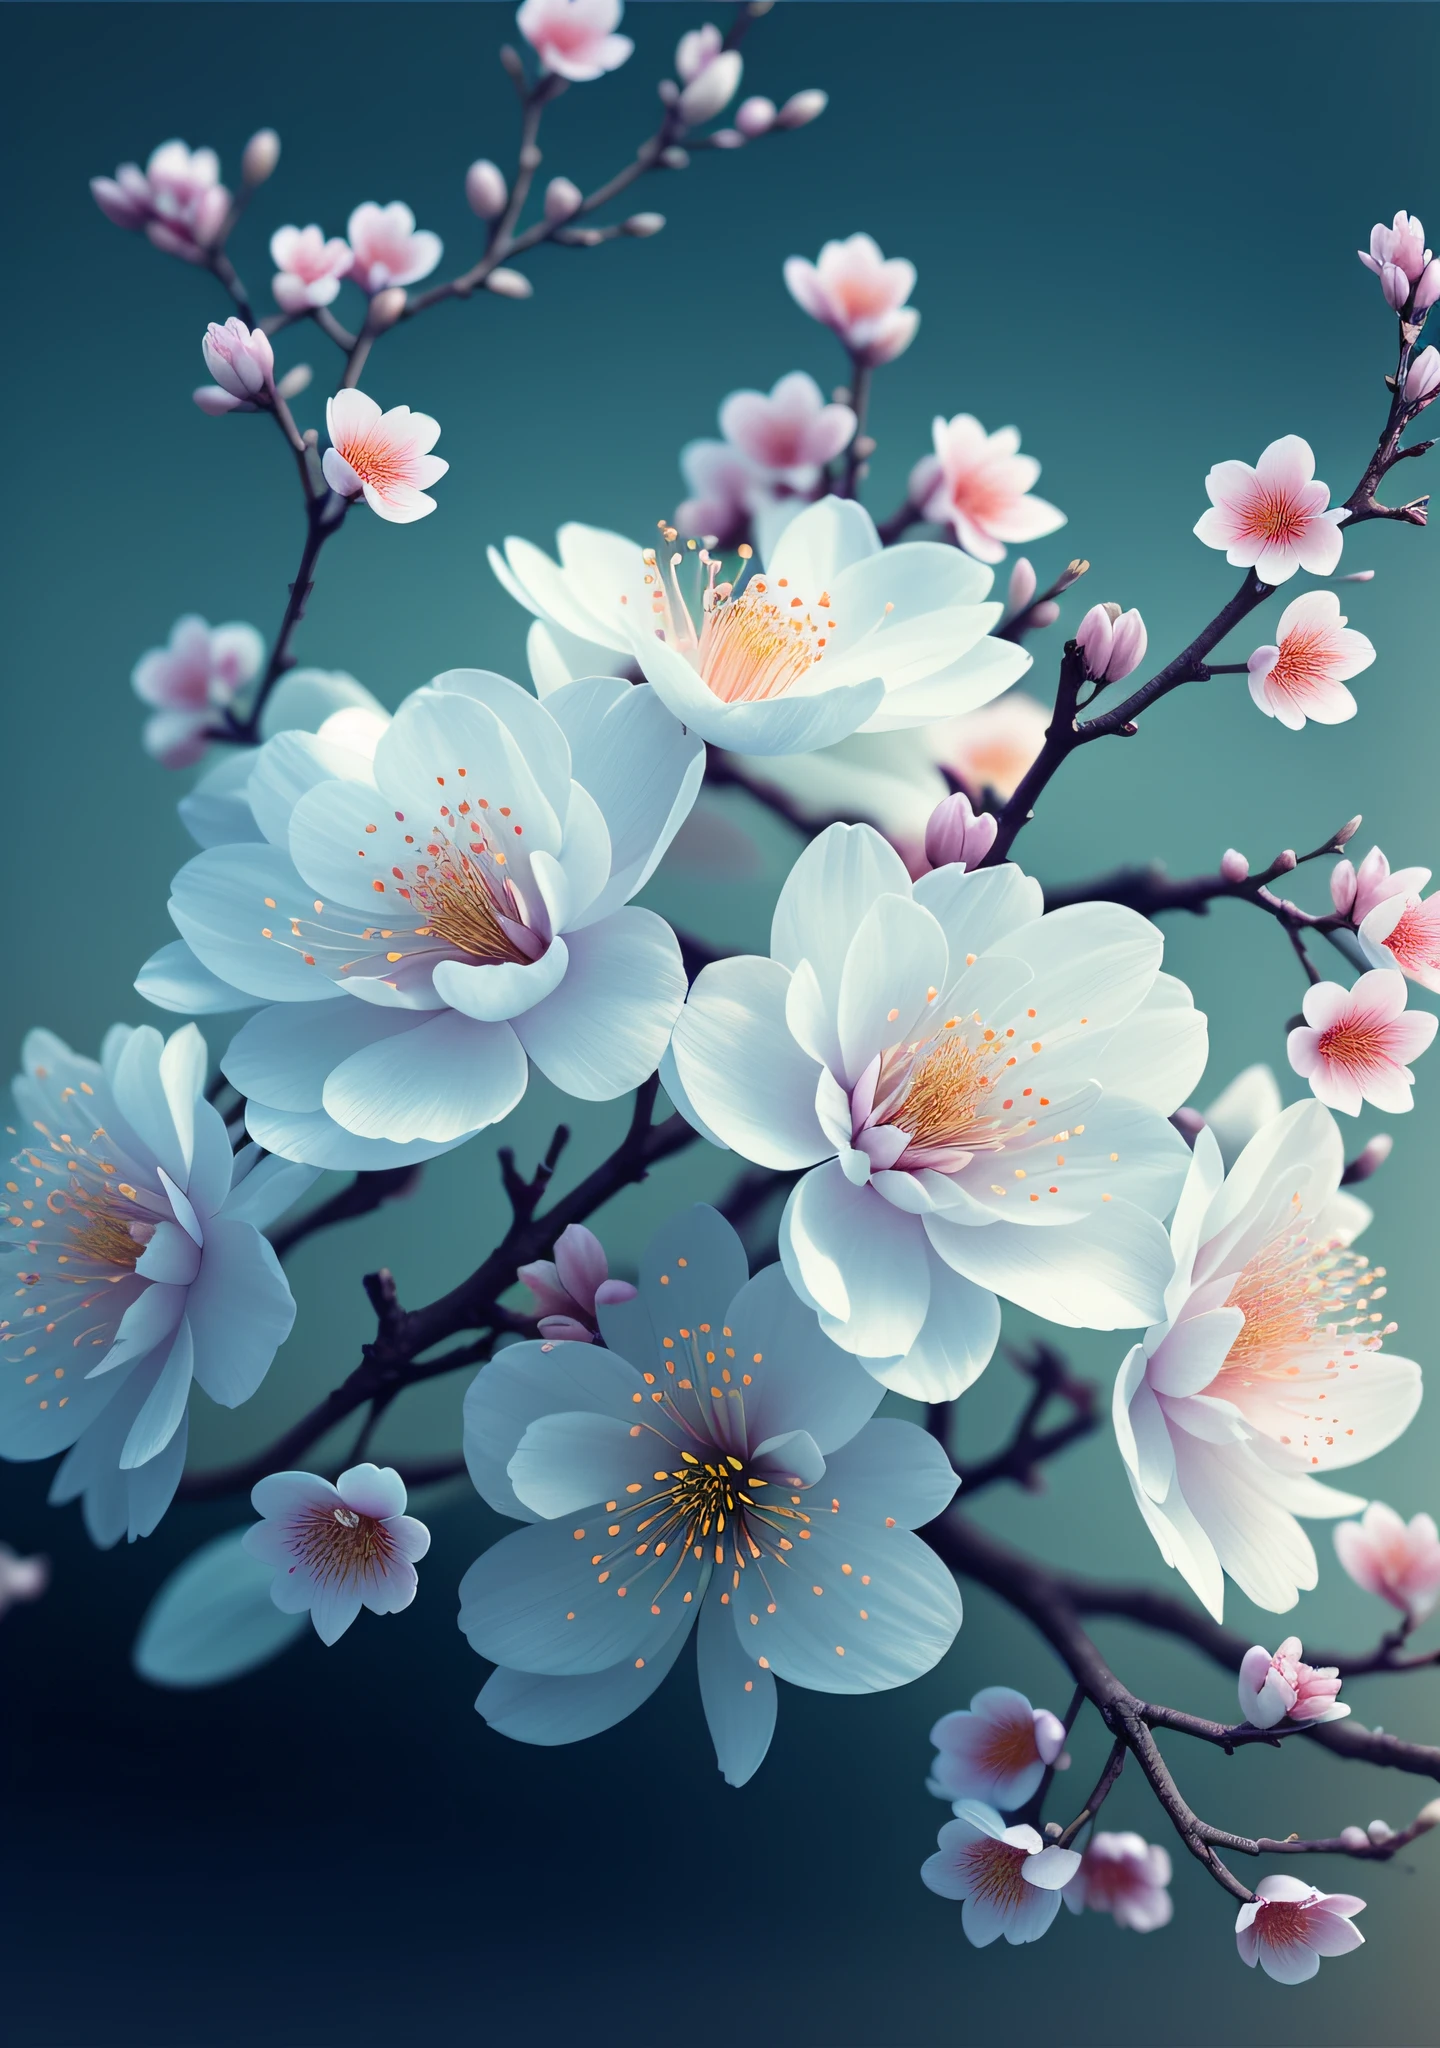 Close-up of a bouquet of peach blossoms on a tree branch，peach blossom：1.2，Oriental elements，paul barson，blossoms，beautiful digital artworks，beautiful digital art，flowers and blossoms，surreal waiizi flowers，beautiful  flowers，flowers in full bloom，flowers with intricate detail，Incredibly beautiful，beautiful art，beautiful composition 3 - d 4 k，gorgeous digital art，